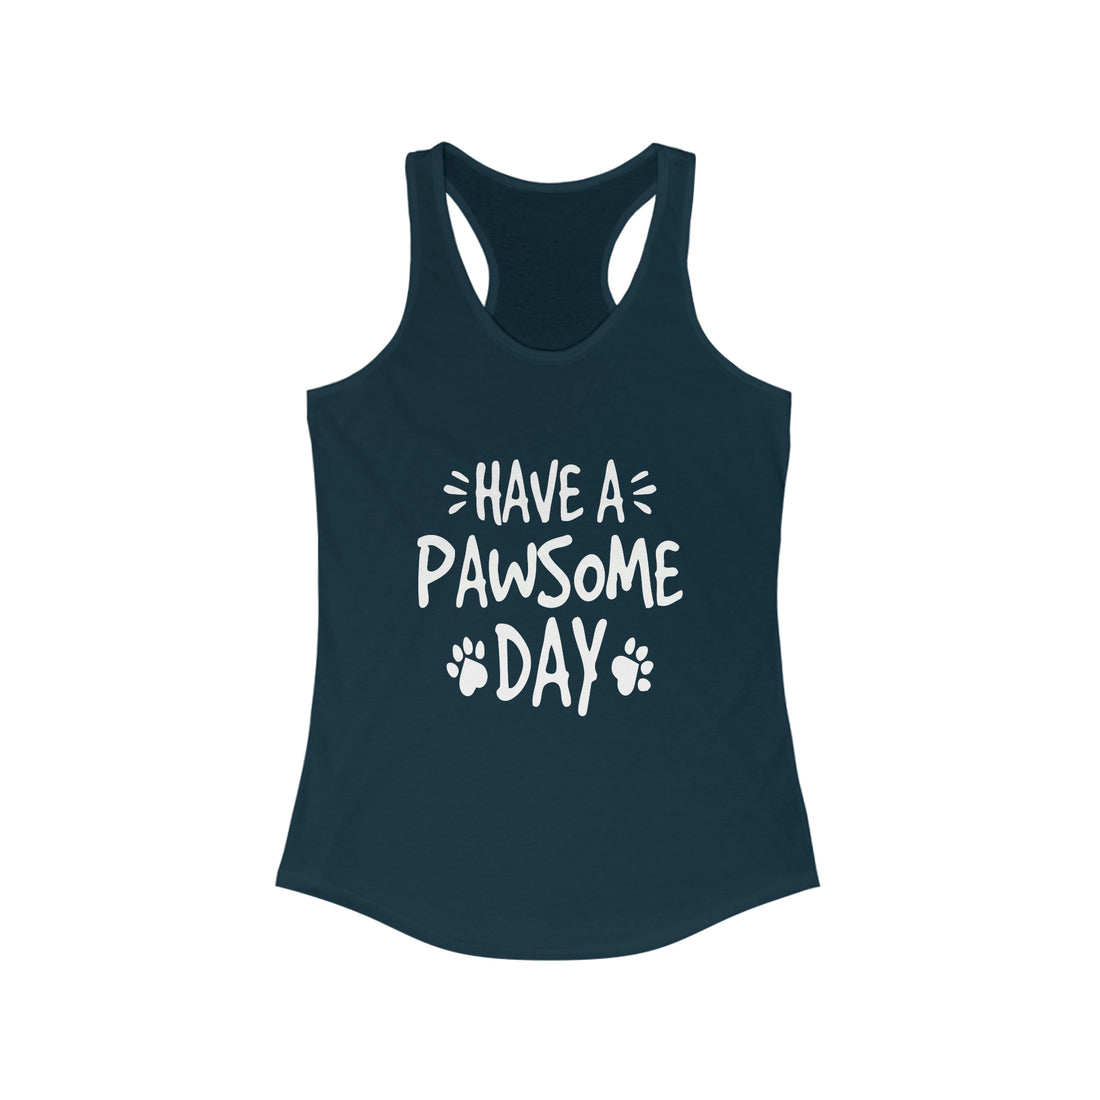 Have A Pawsome Day - Racerback Tank Top